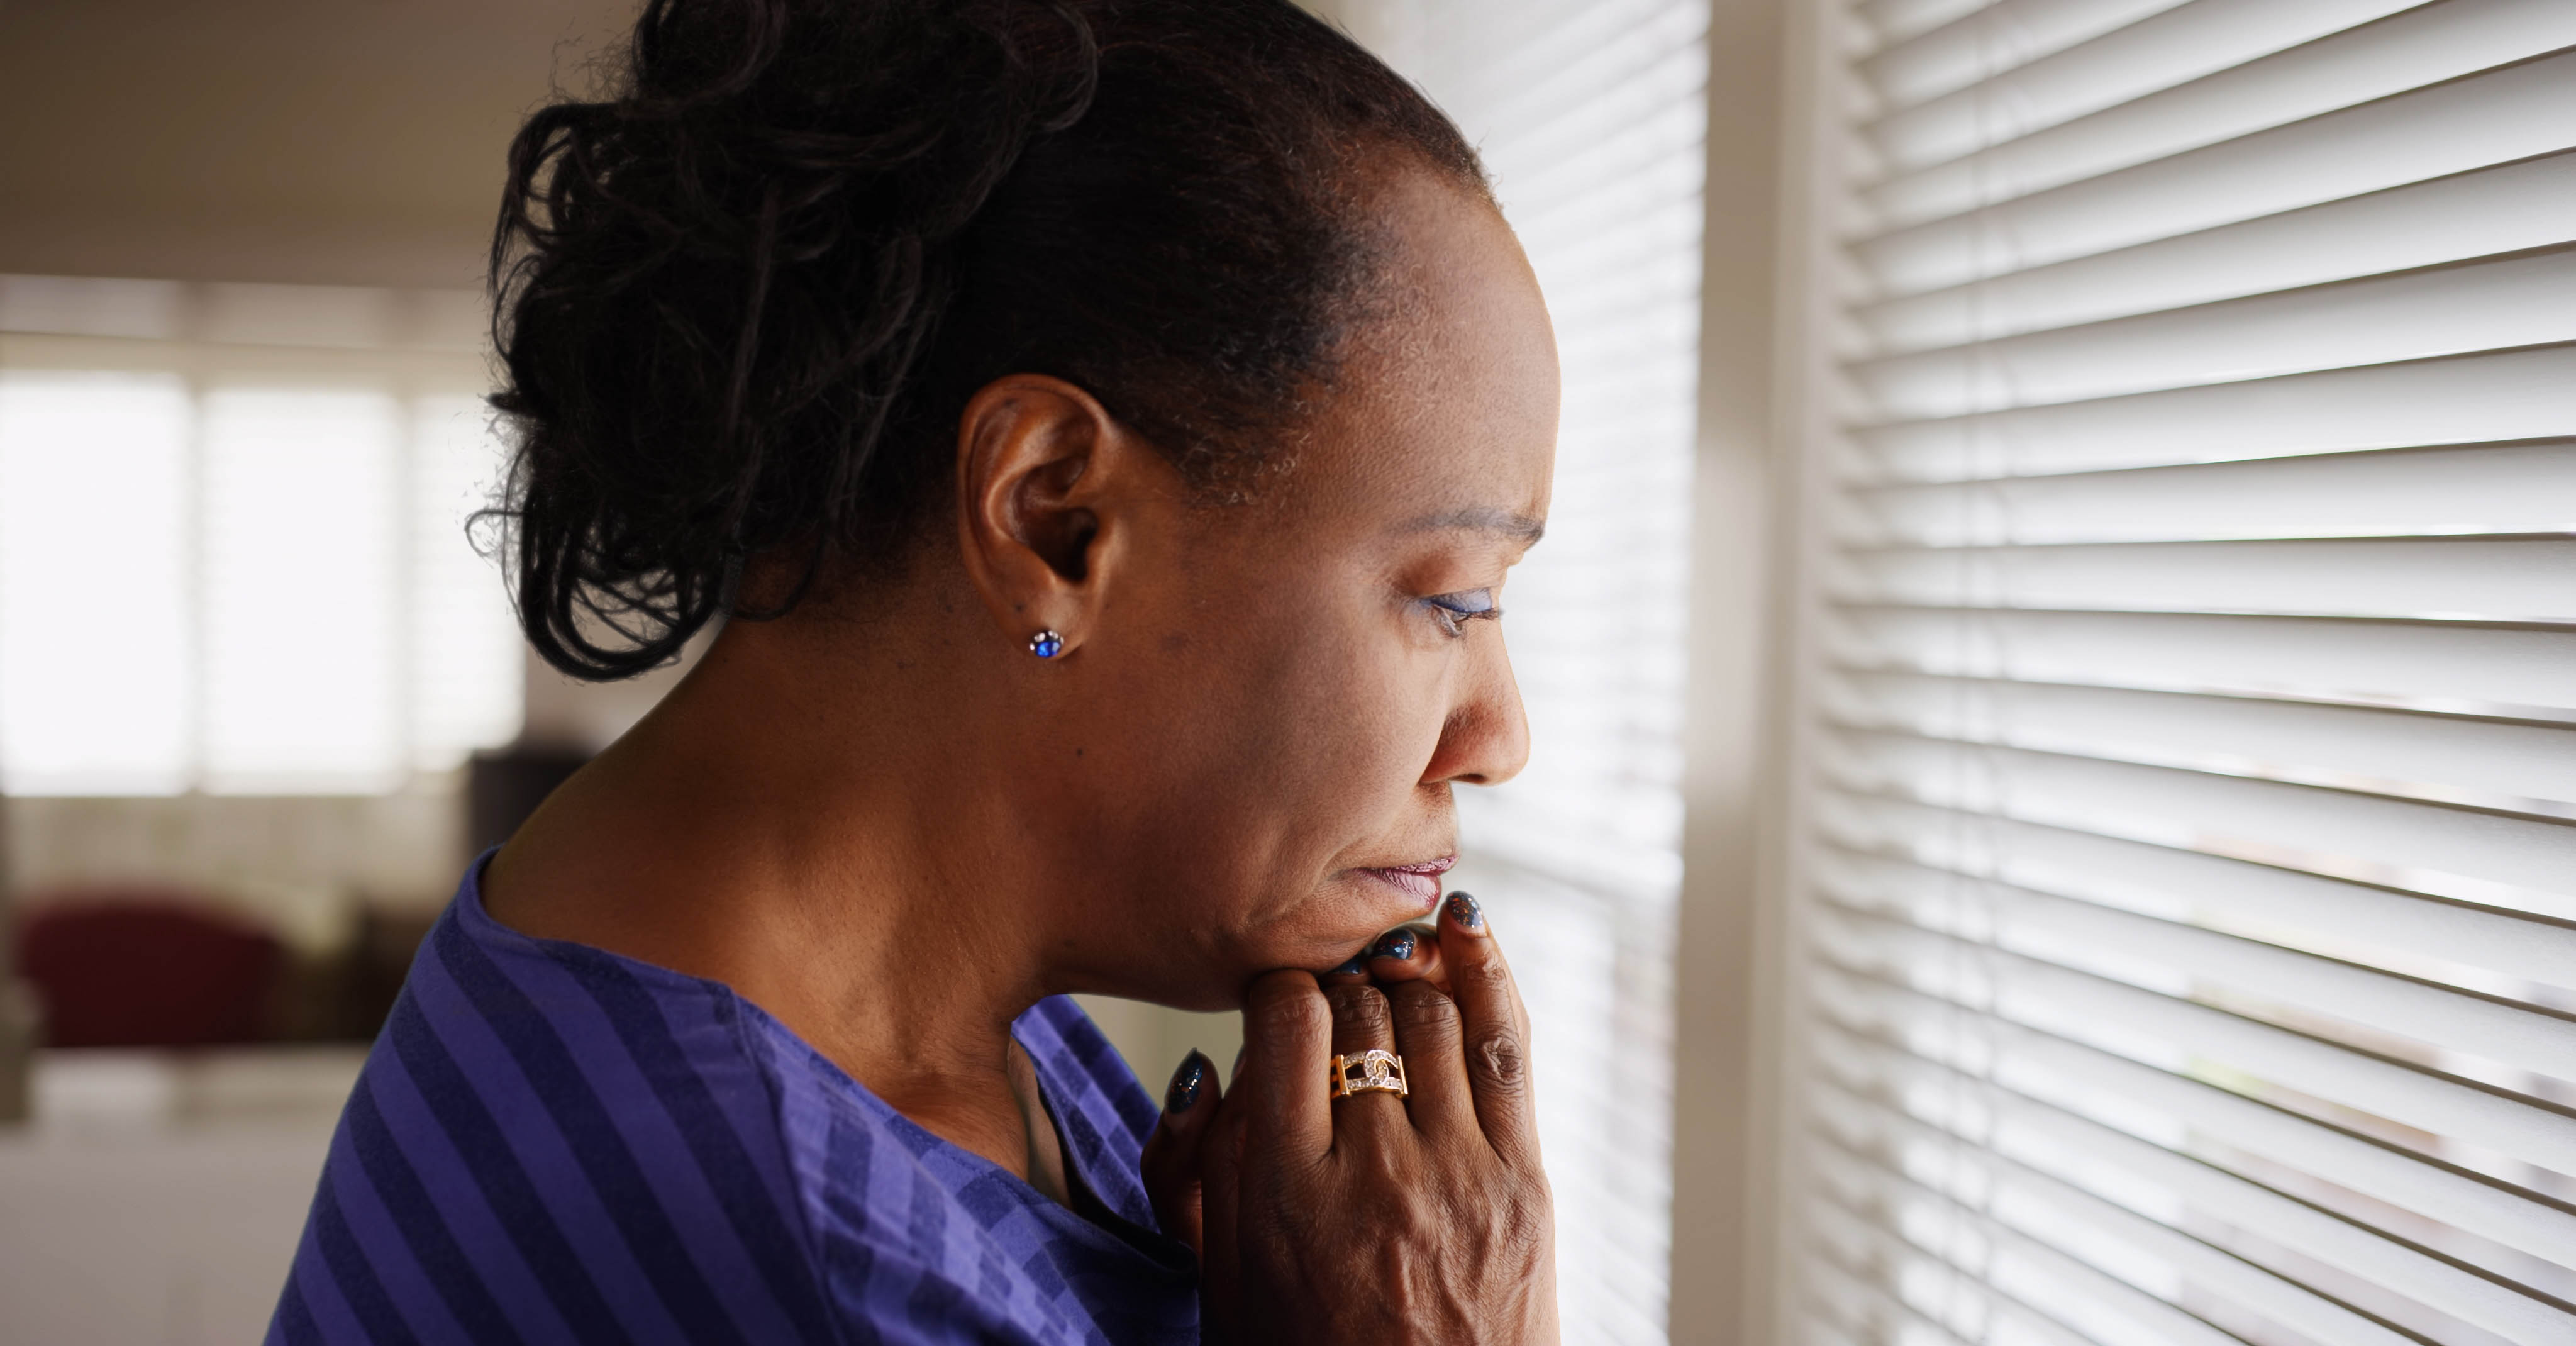 25 years of research shows insidious effect of racism on Black women's menopausal transition, health